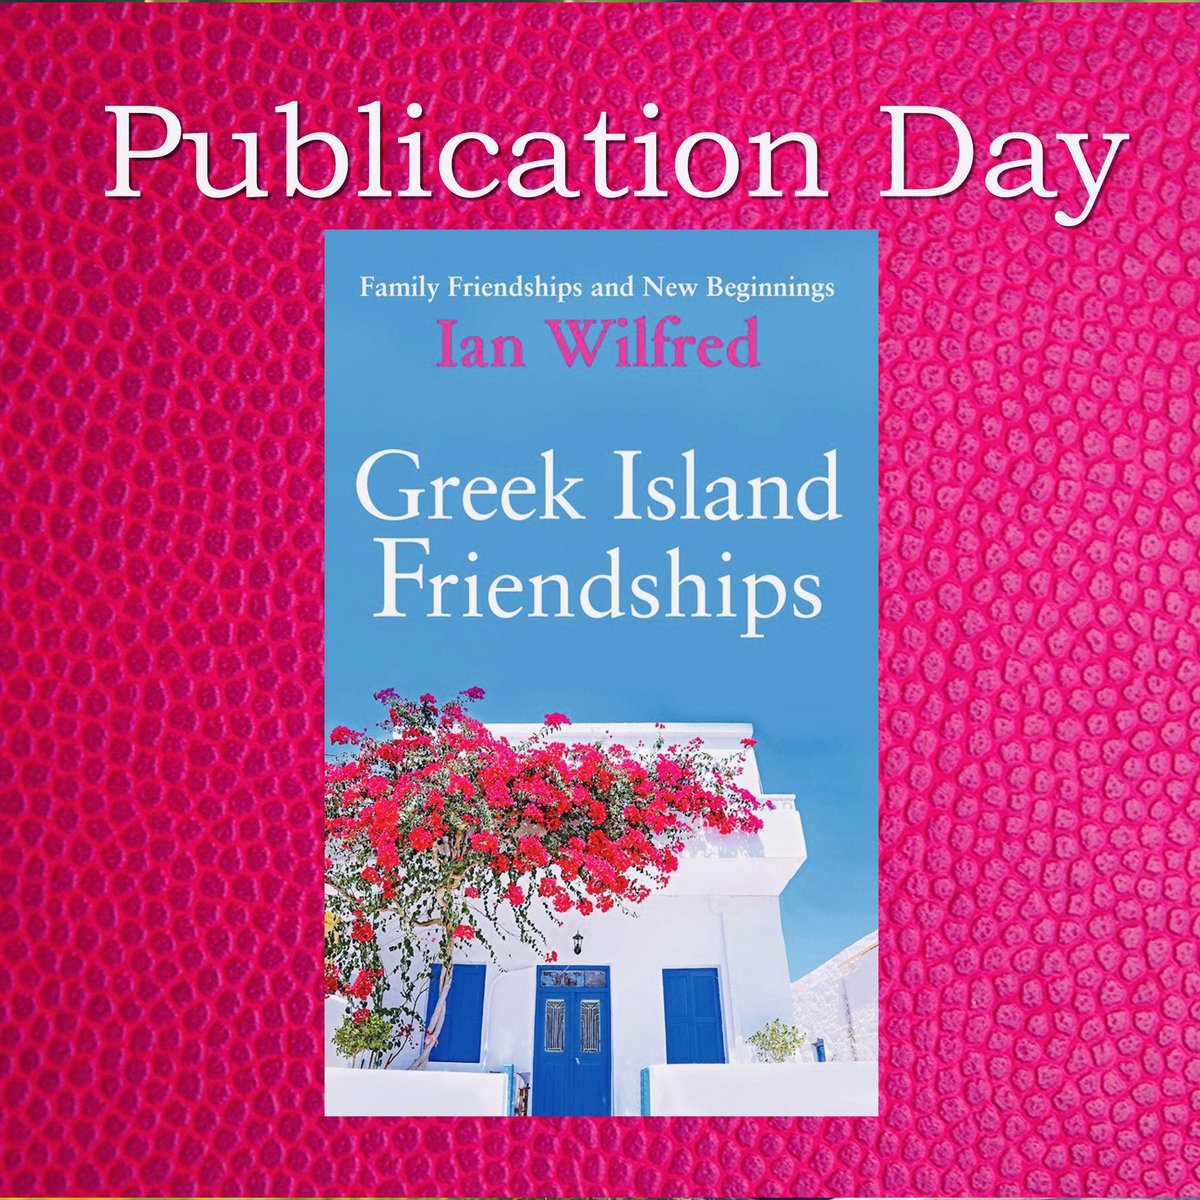 ☀️OUT TODAY☀️ Greek Island Friendships is an uplifting feel-good story of friendships and new beginnings along the way there are a few secrets and a little romance Kindle unlimited - 99p99c kindle - Paperback UK Amazon.co.uk/dp/B0CW1MQZXG US amazon.com/dp/B0CW1MQZXG